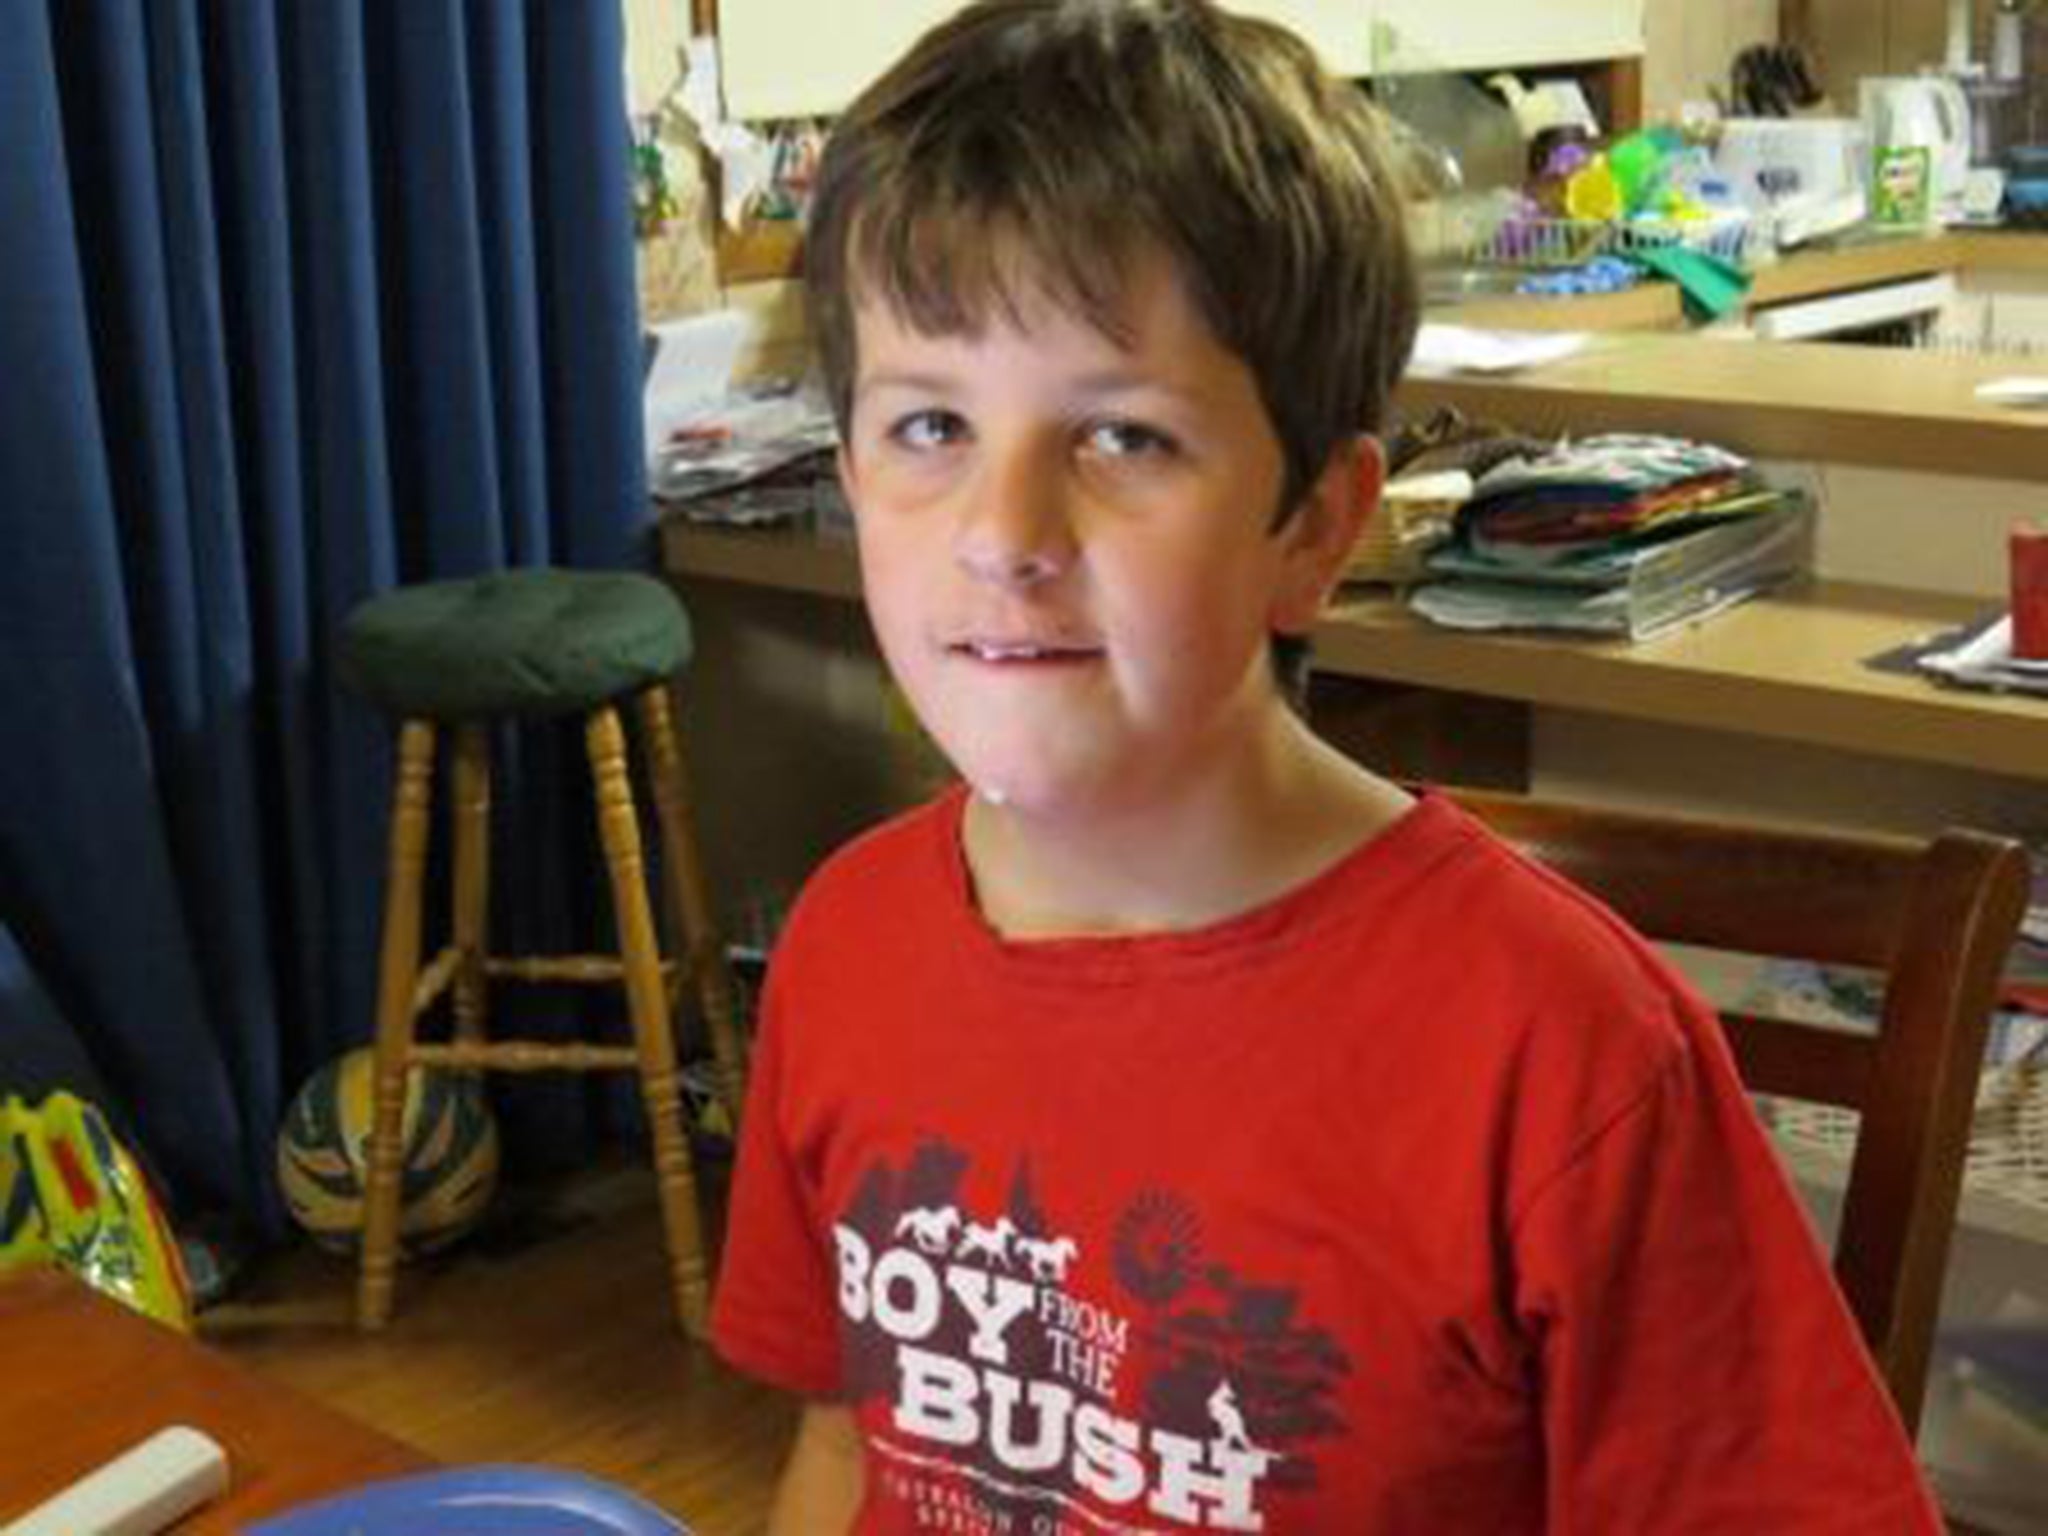 Luke Shambrook, who has autism, was lost in the Australian bush for four days